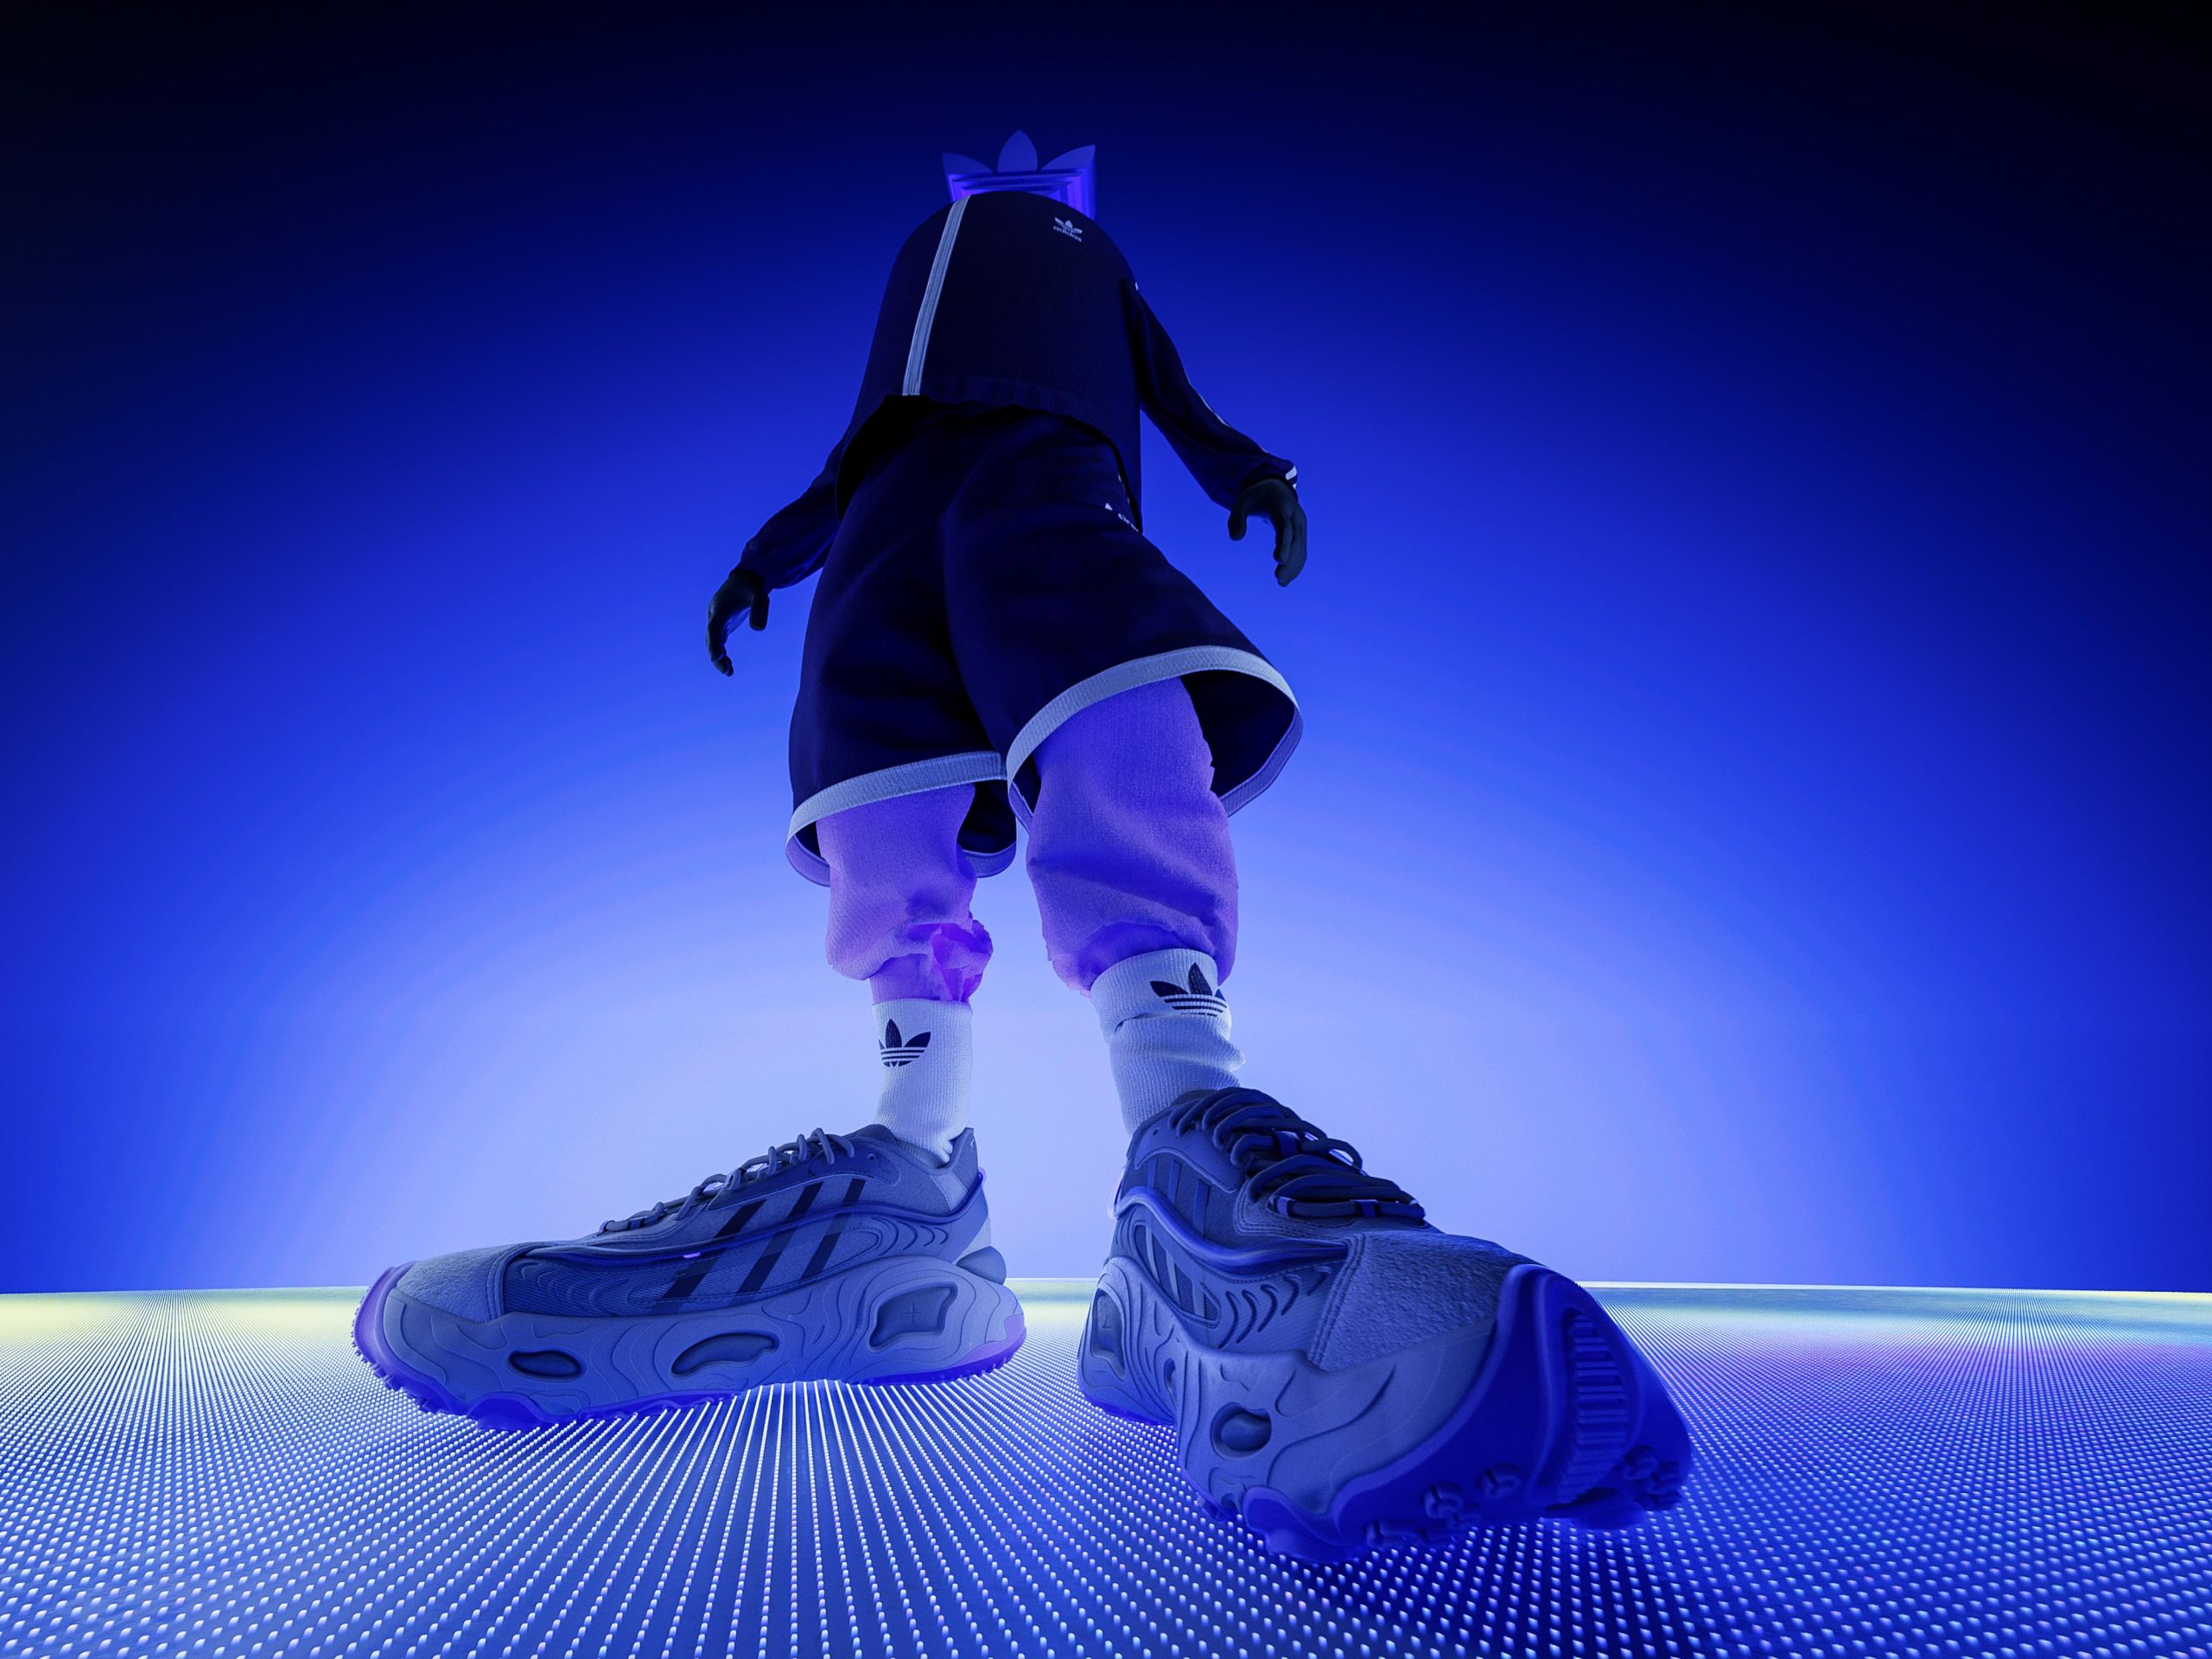 The picture shows an Adidas Ozworld avatar